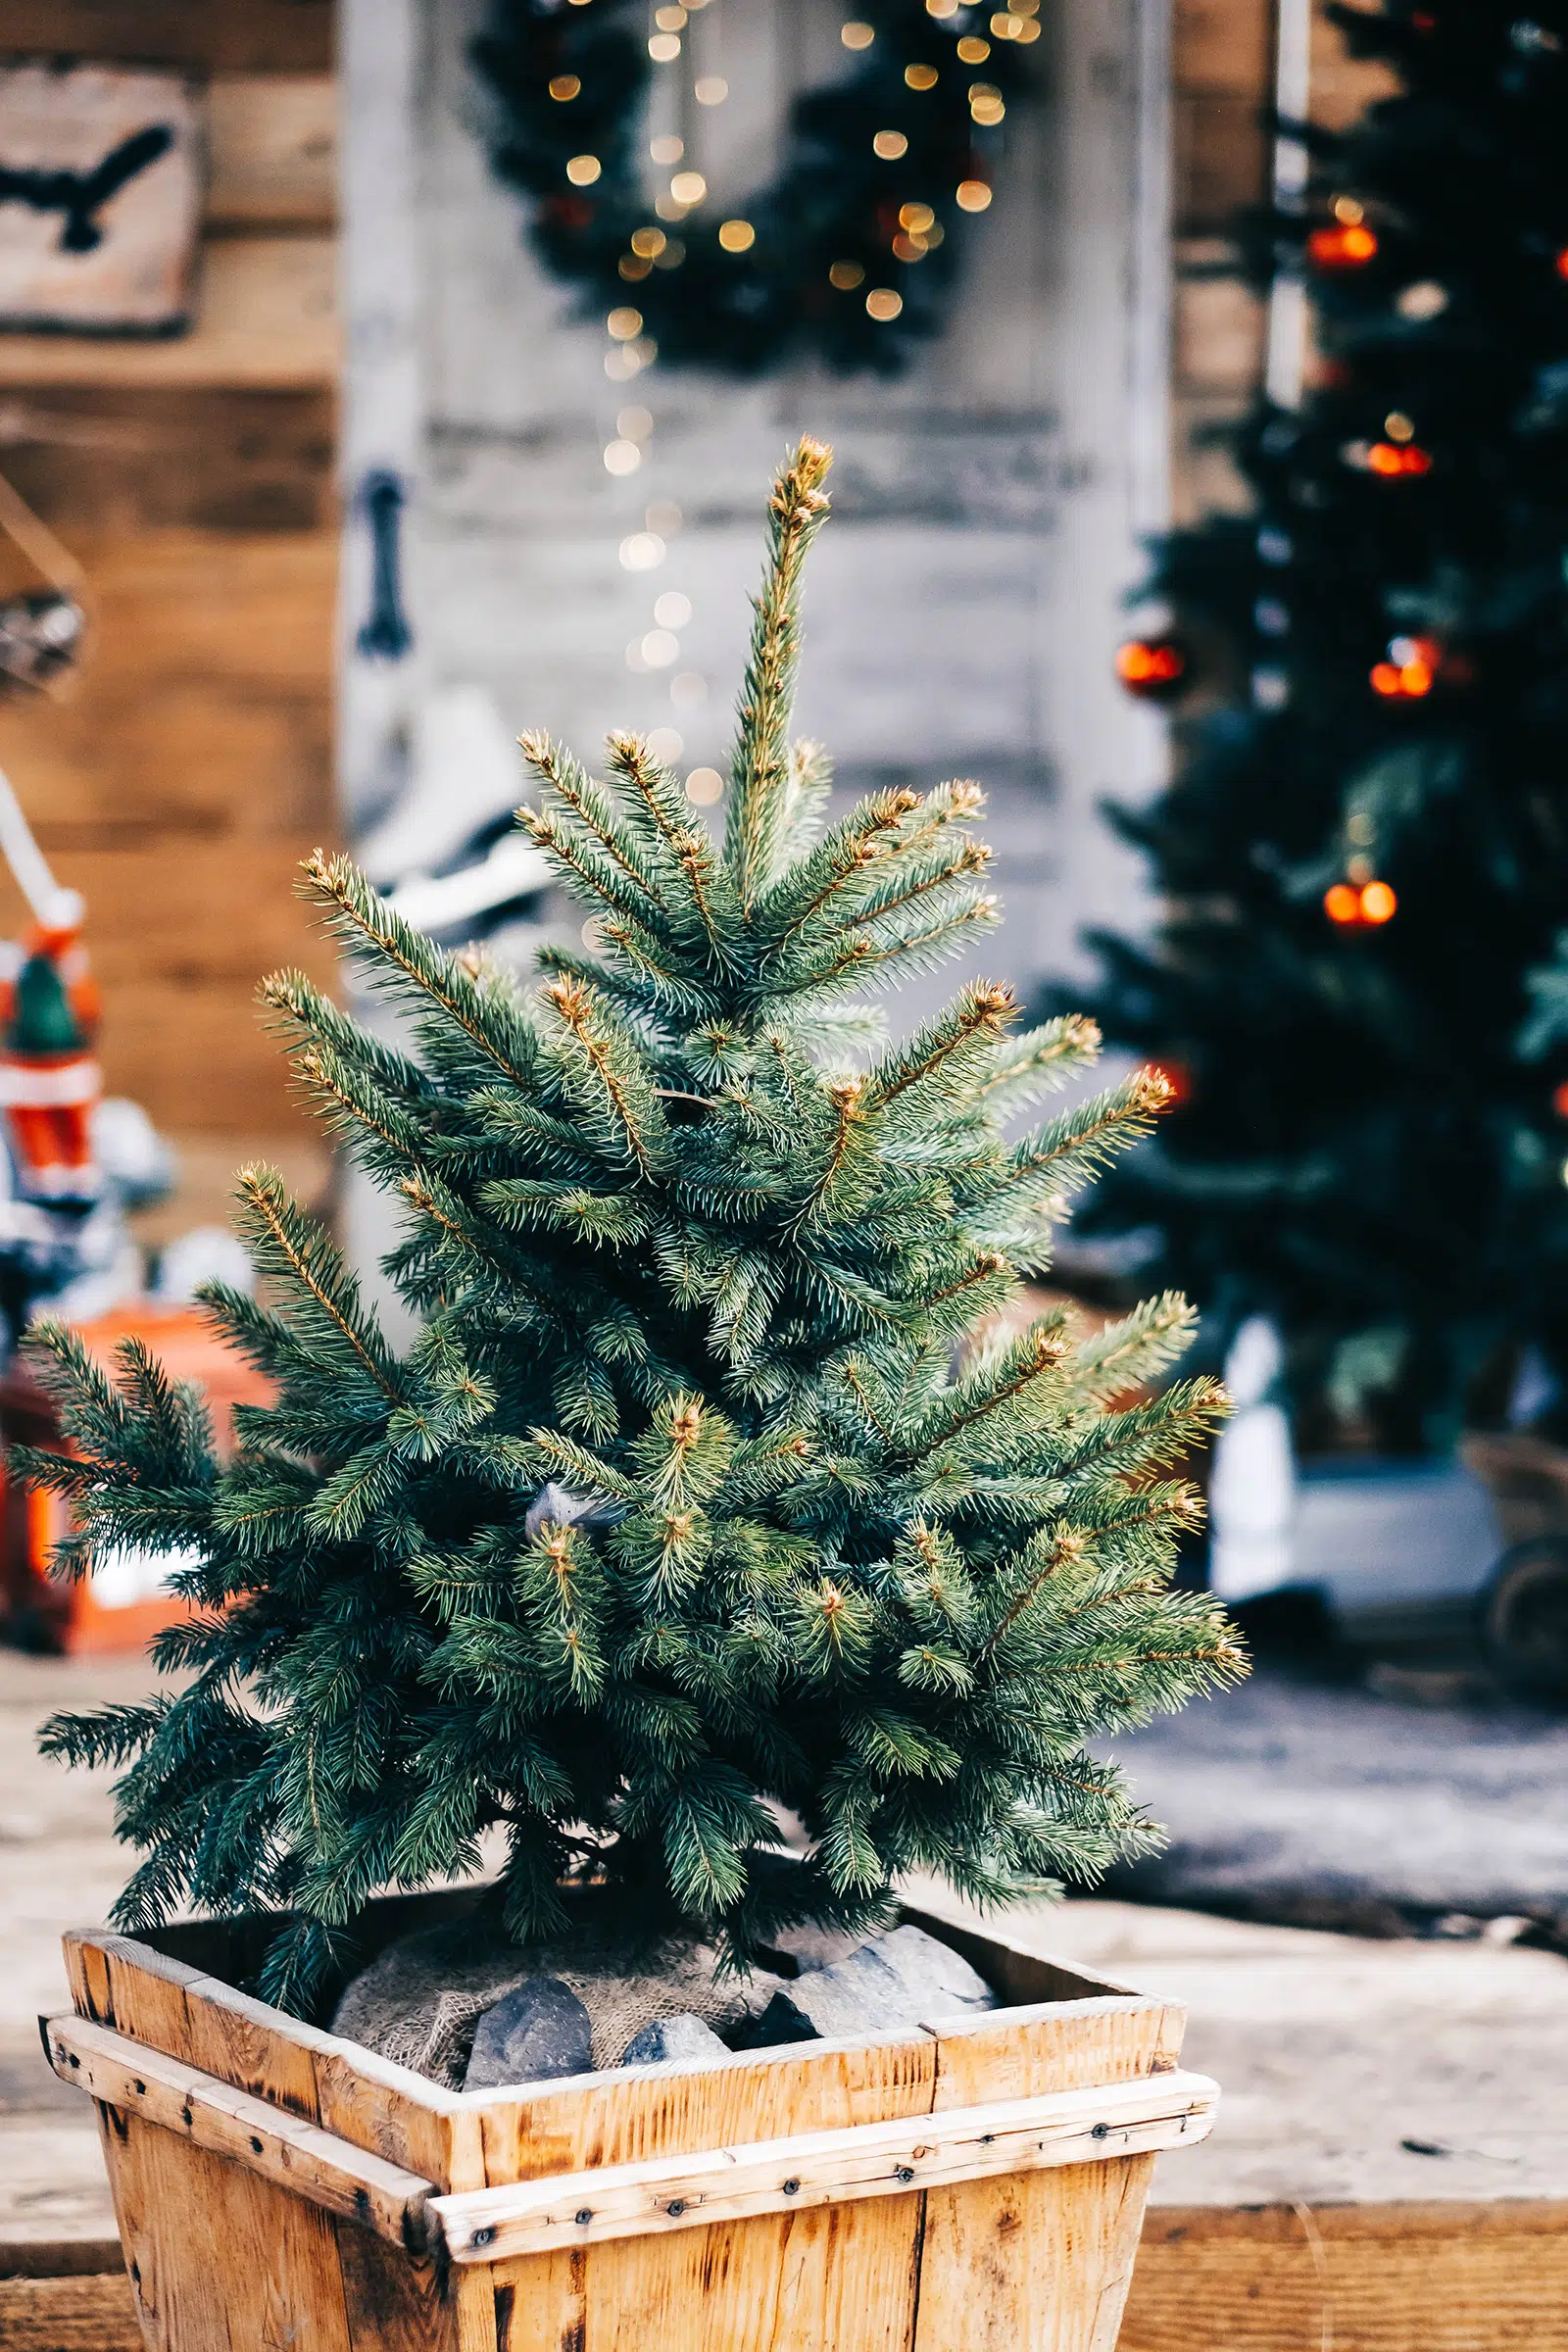 Can You Buy A Potted Christmas Tree?